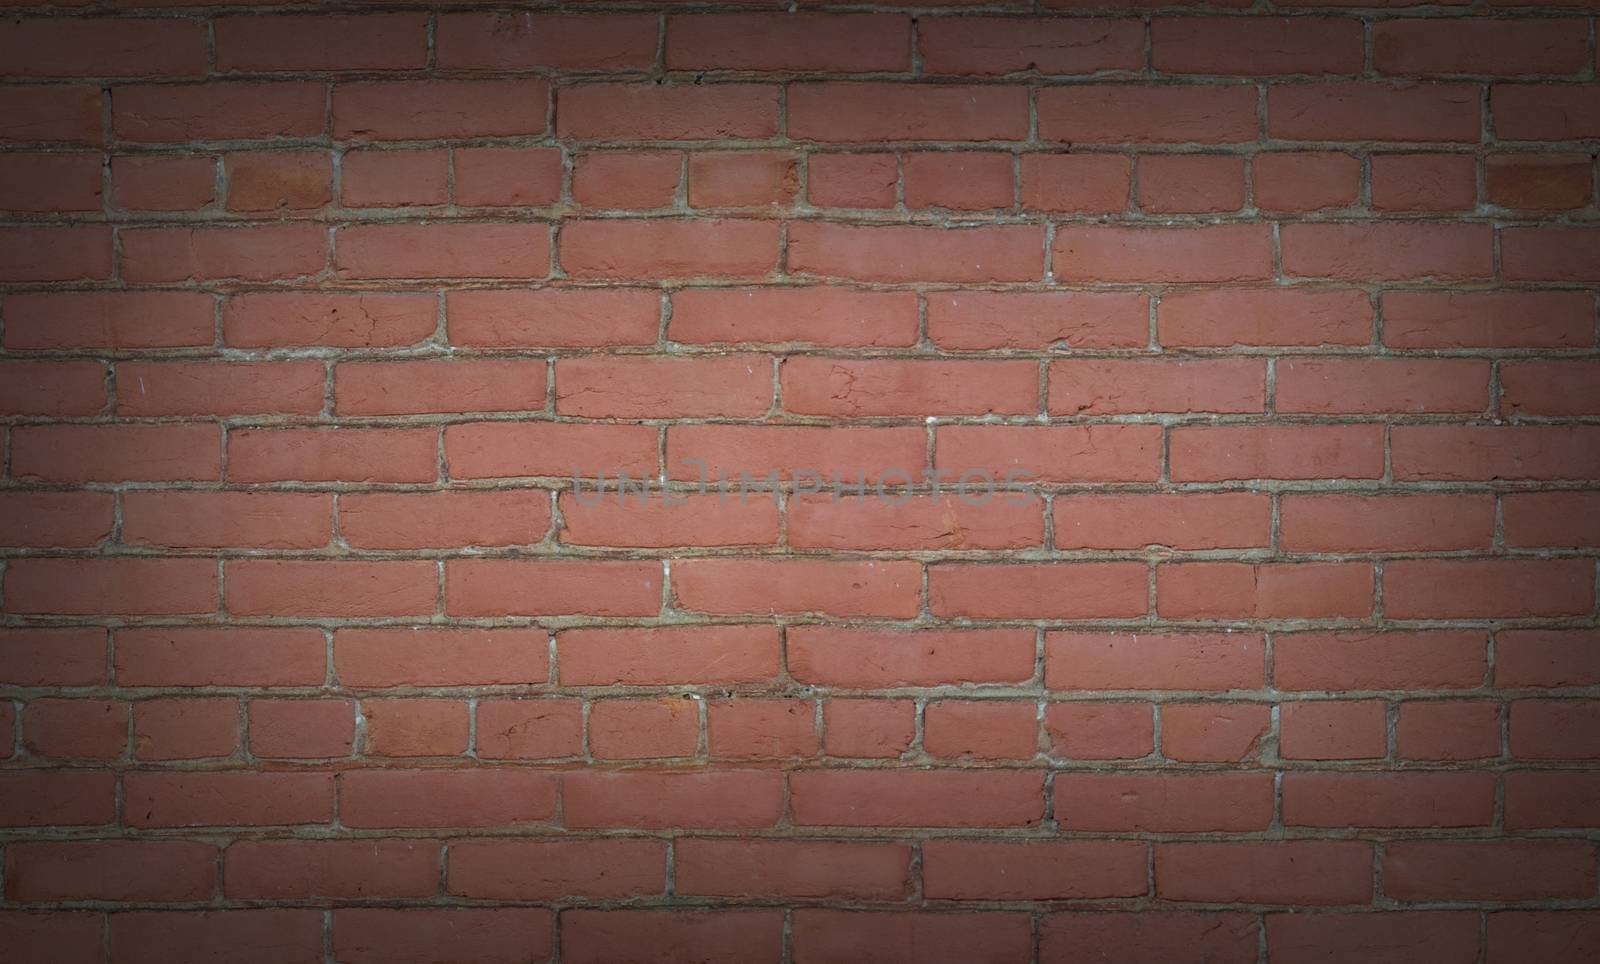 Seamless red brick wall background texture vignetted around edges